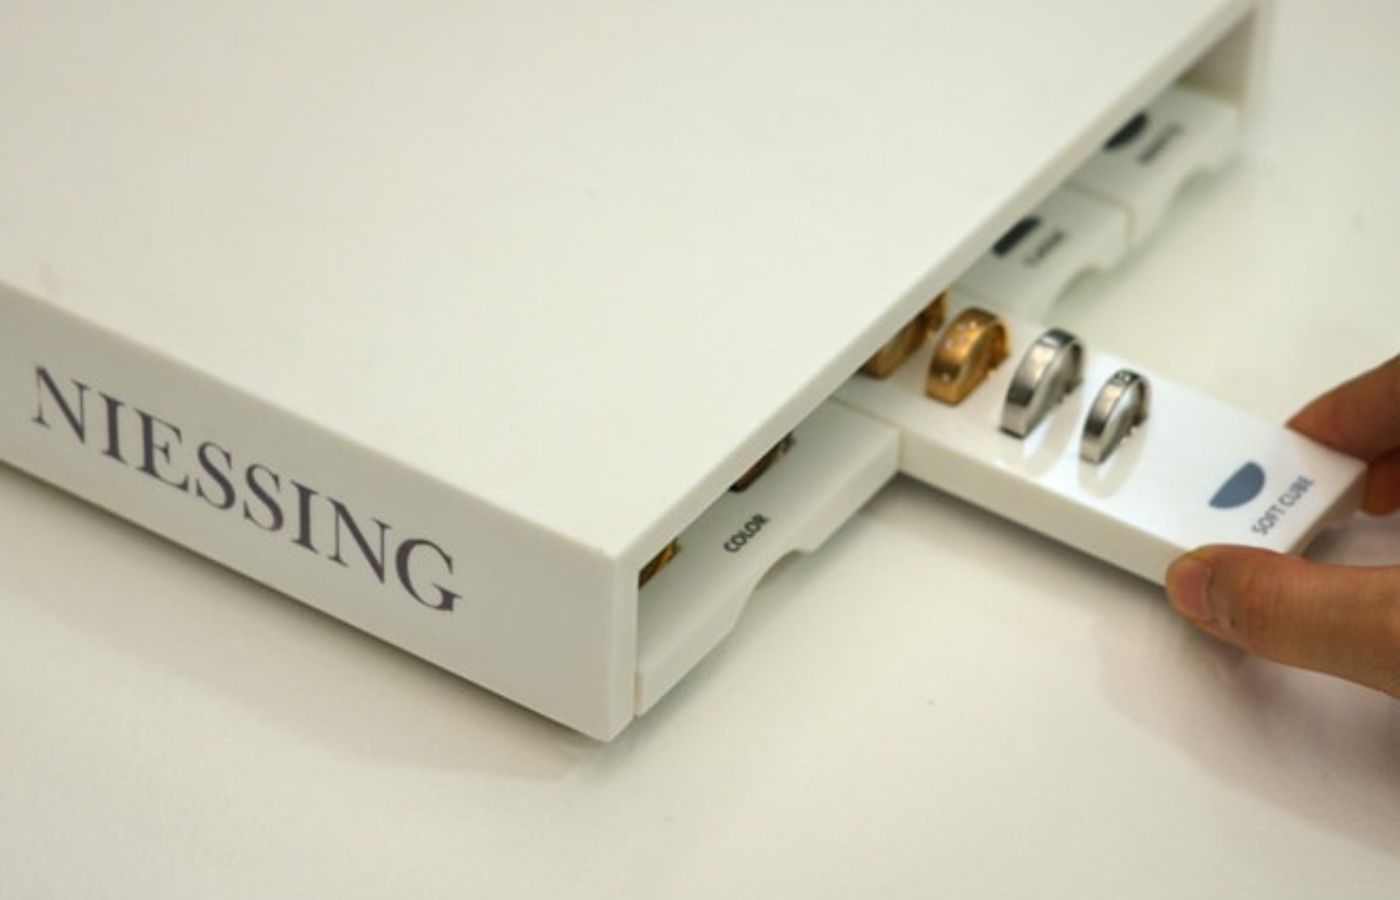 Ordering Your Niessing Ring